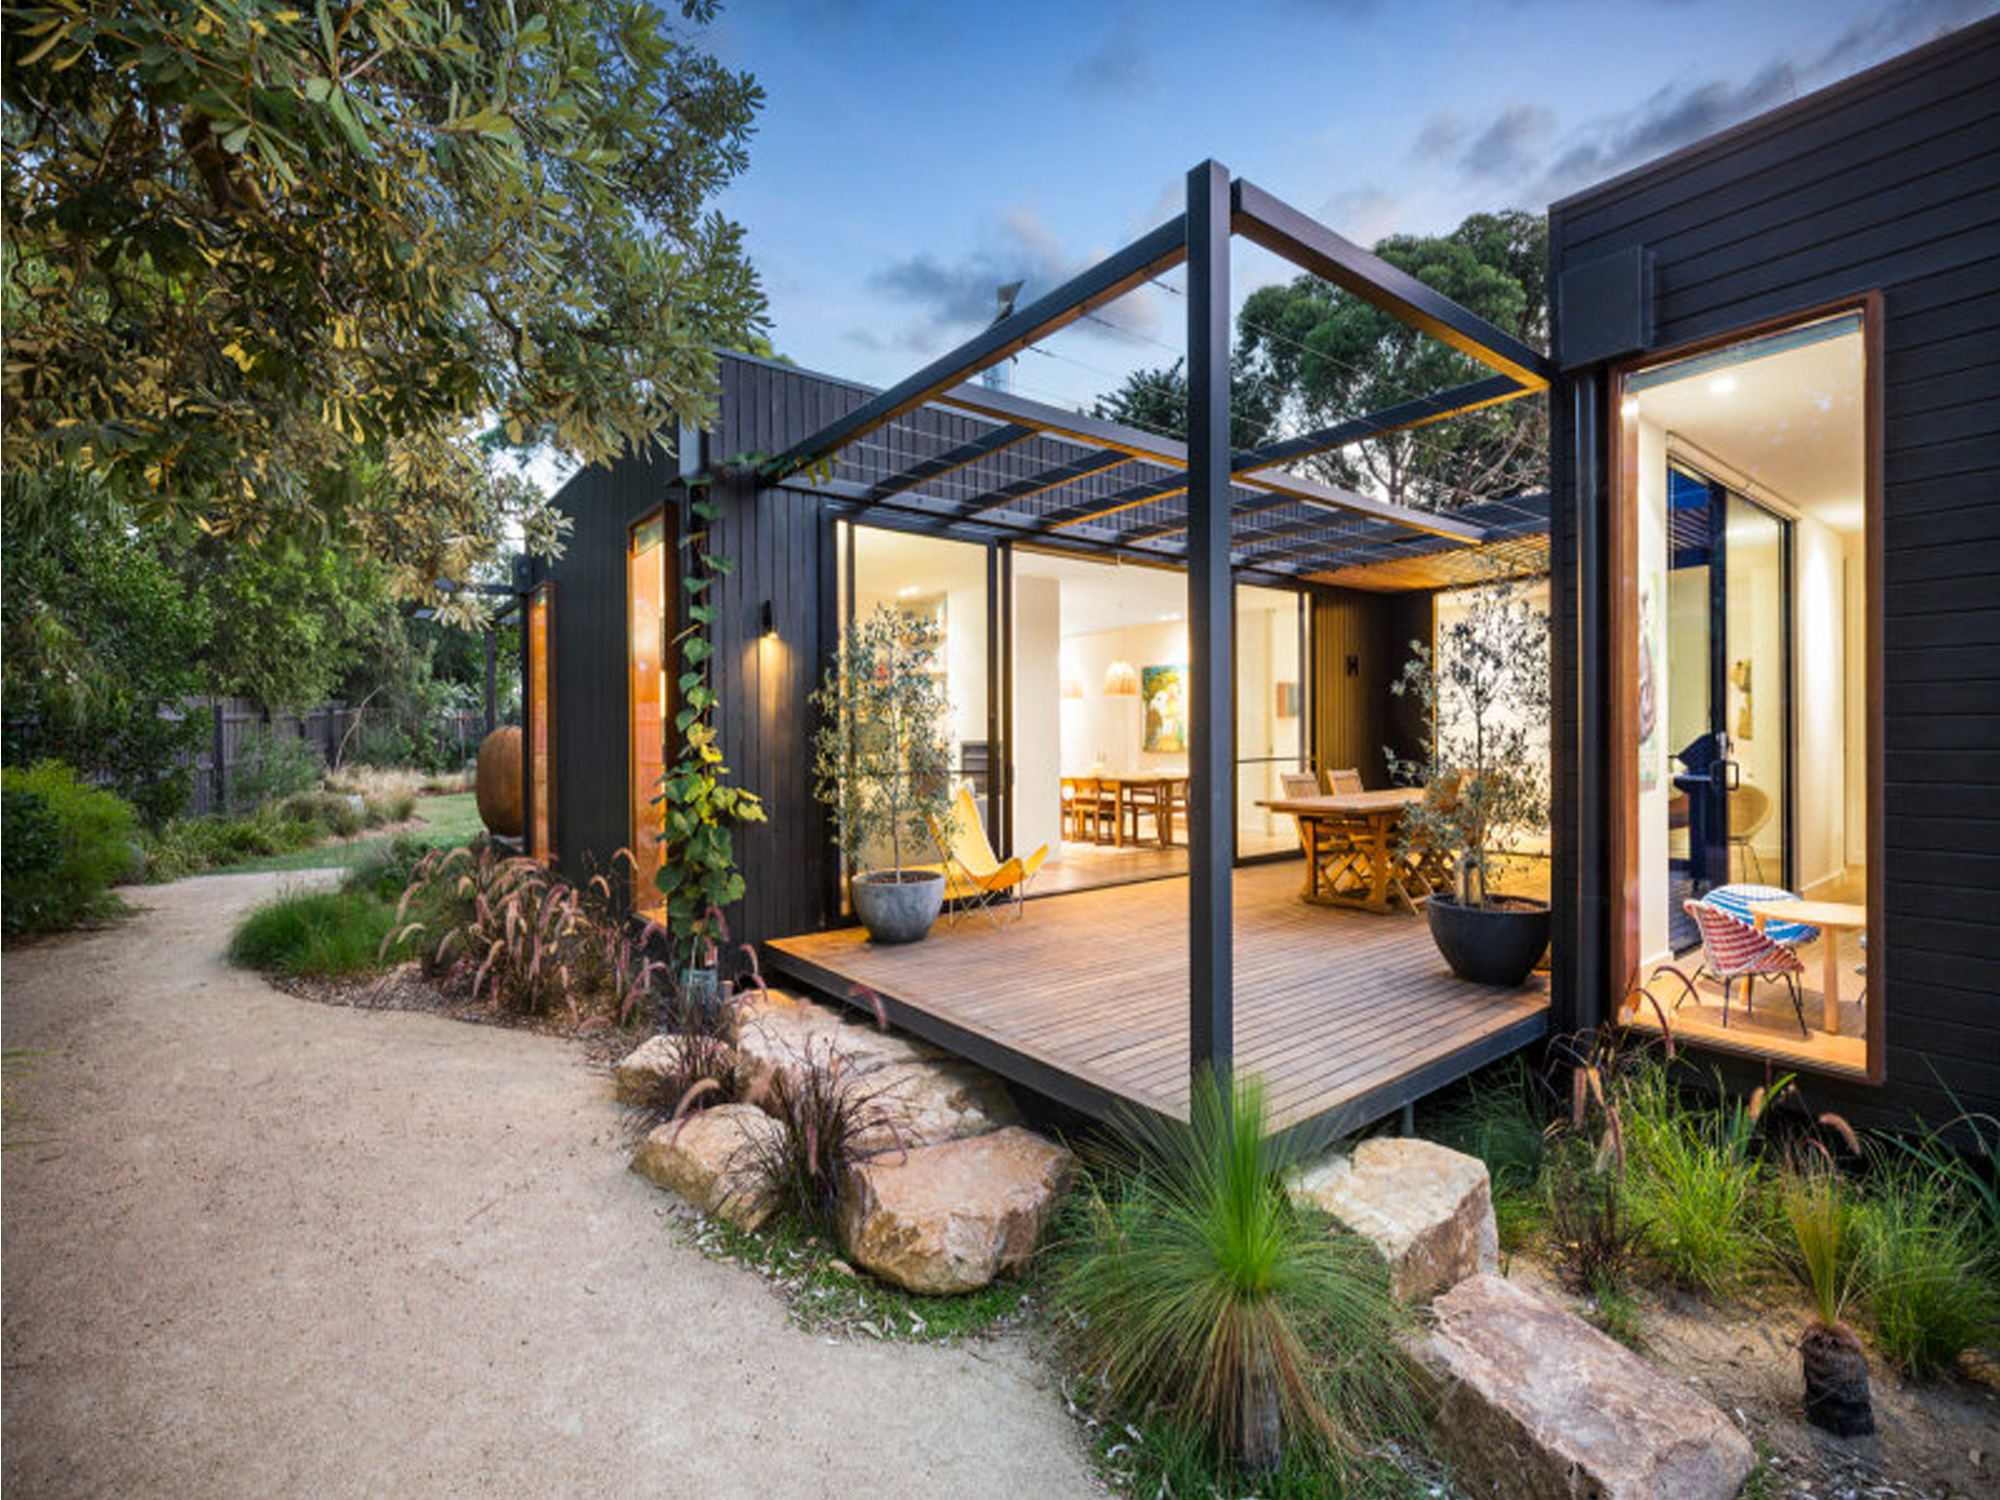 10 Sustainable Home Design Ideas For An Eco Friendly Abode